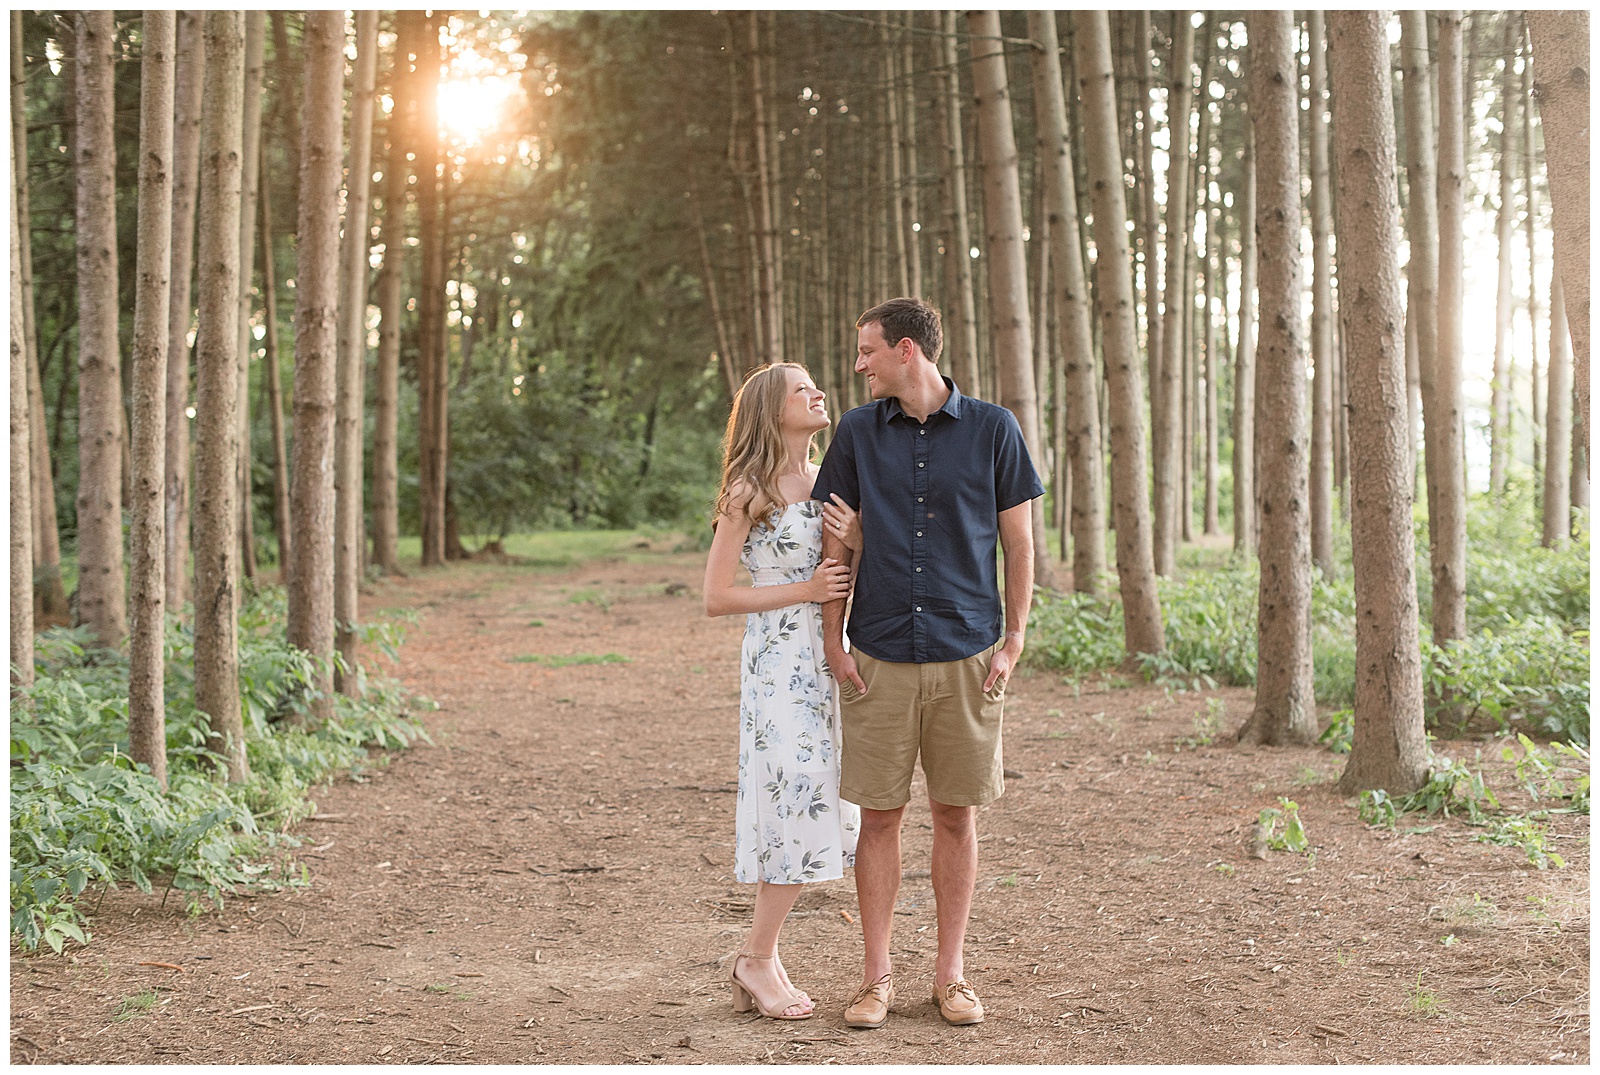 engaged couple looking at each other smiling in pine tree grove with girl in floral dress and guy in button up shirt and khaki shorts